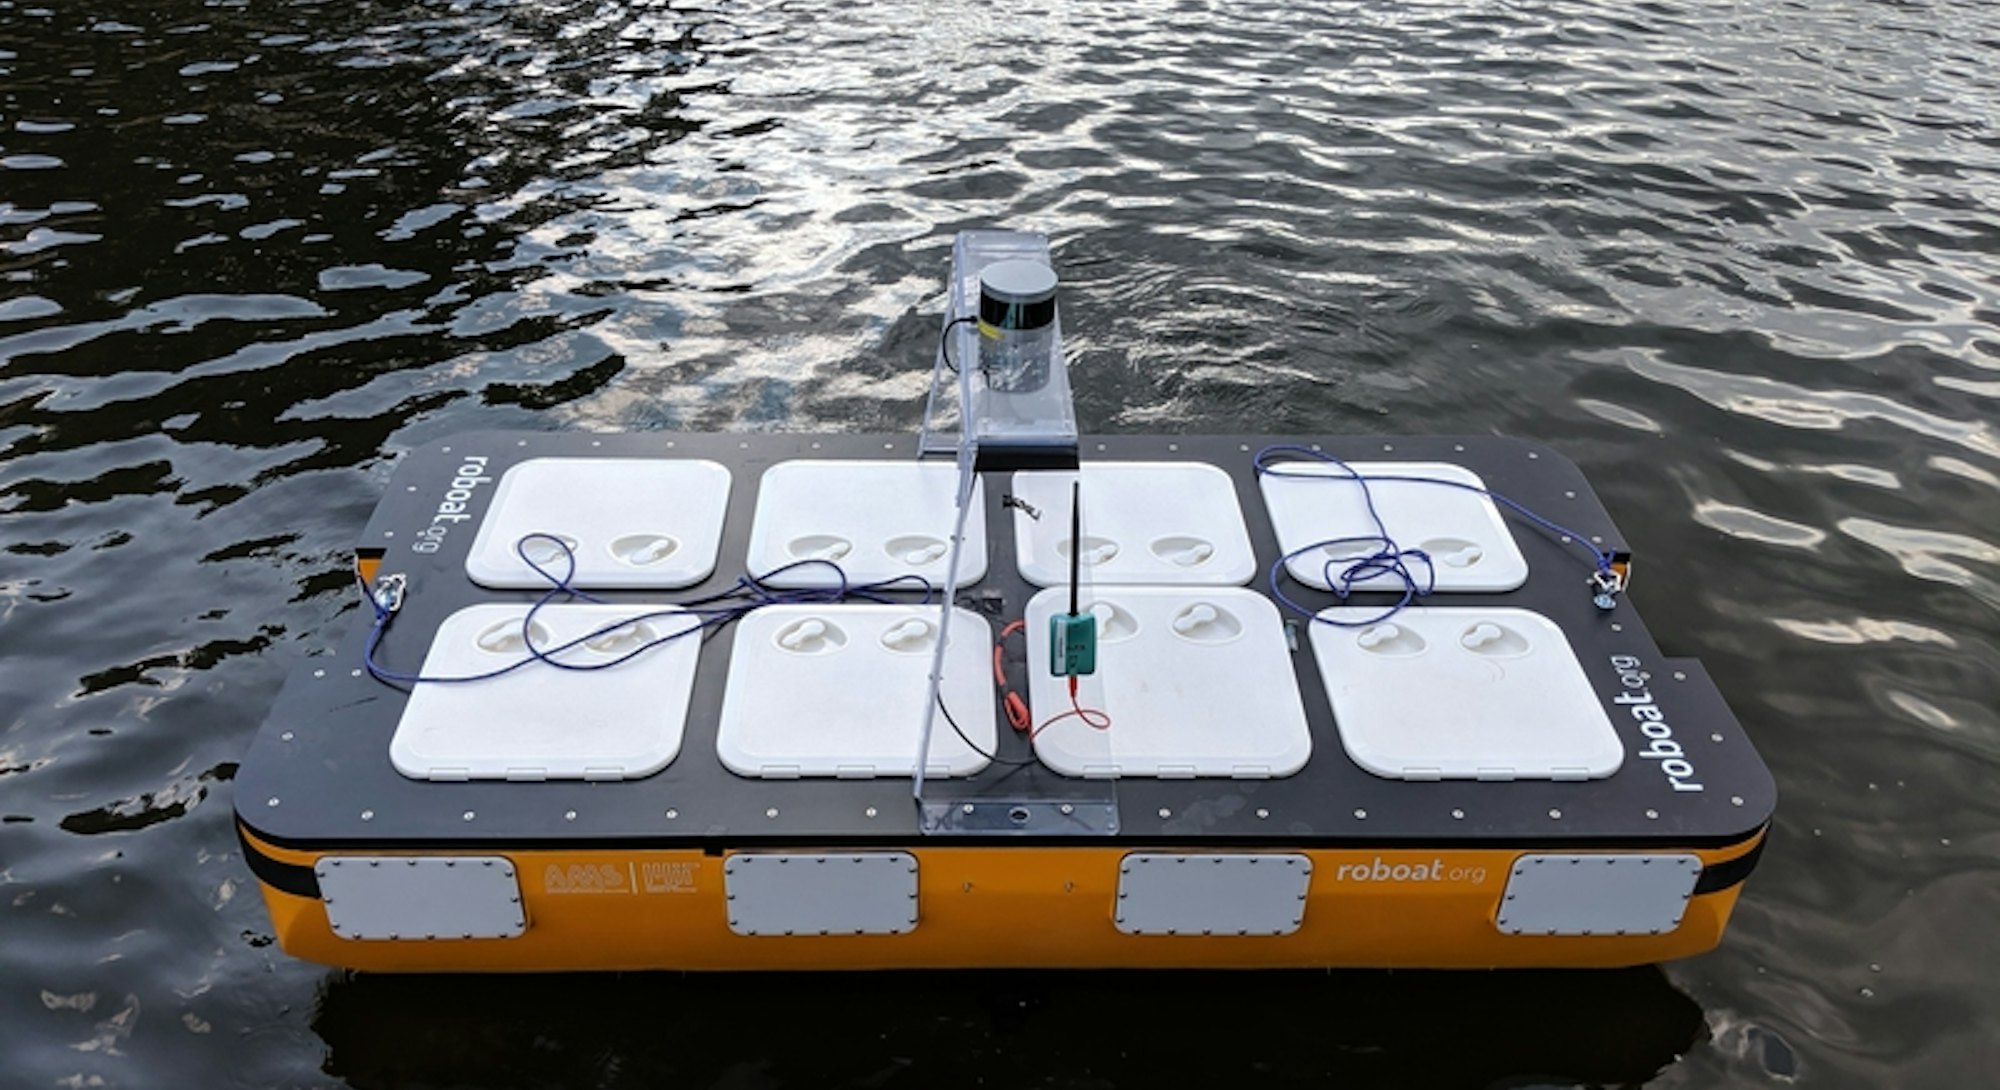 The autonomous Roboat II made by MIT CSAIL and researchers in Amsterdam